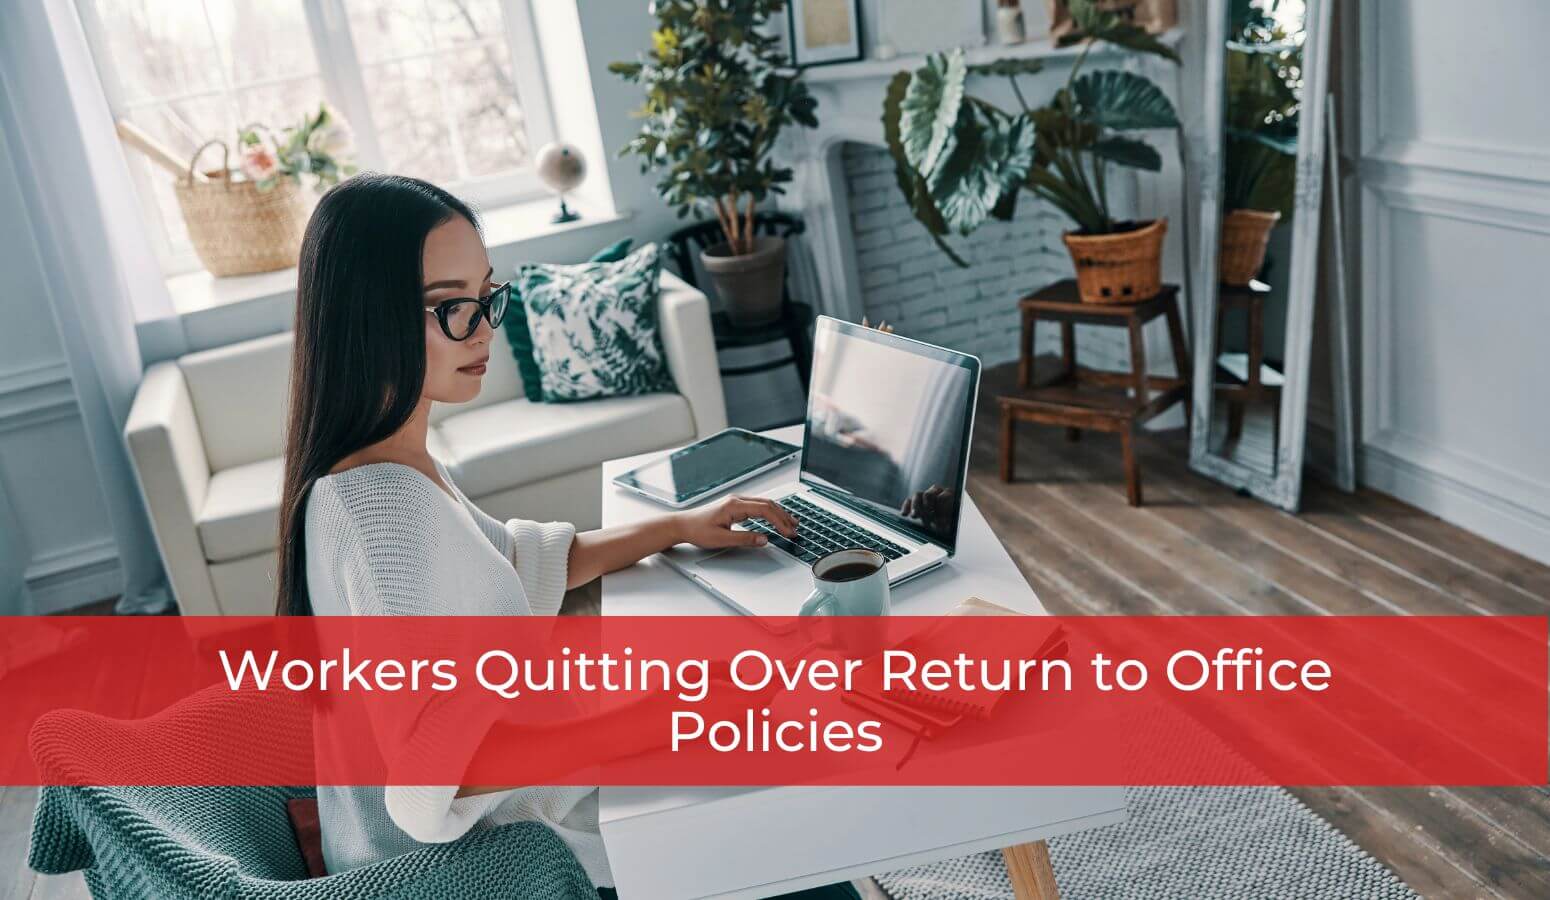 Featured image for “Workers Quitting Over Return to Office Policies”